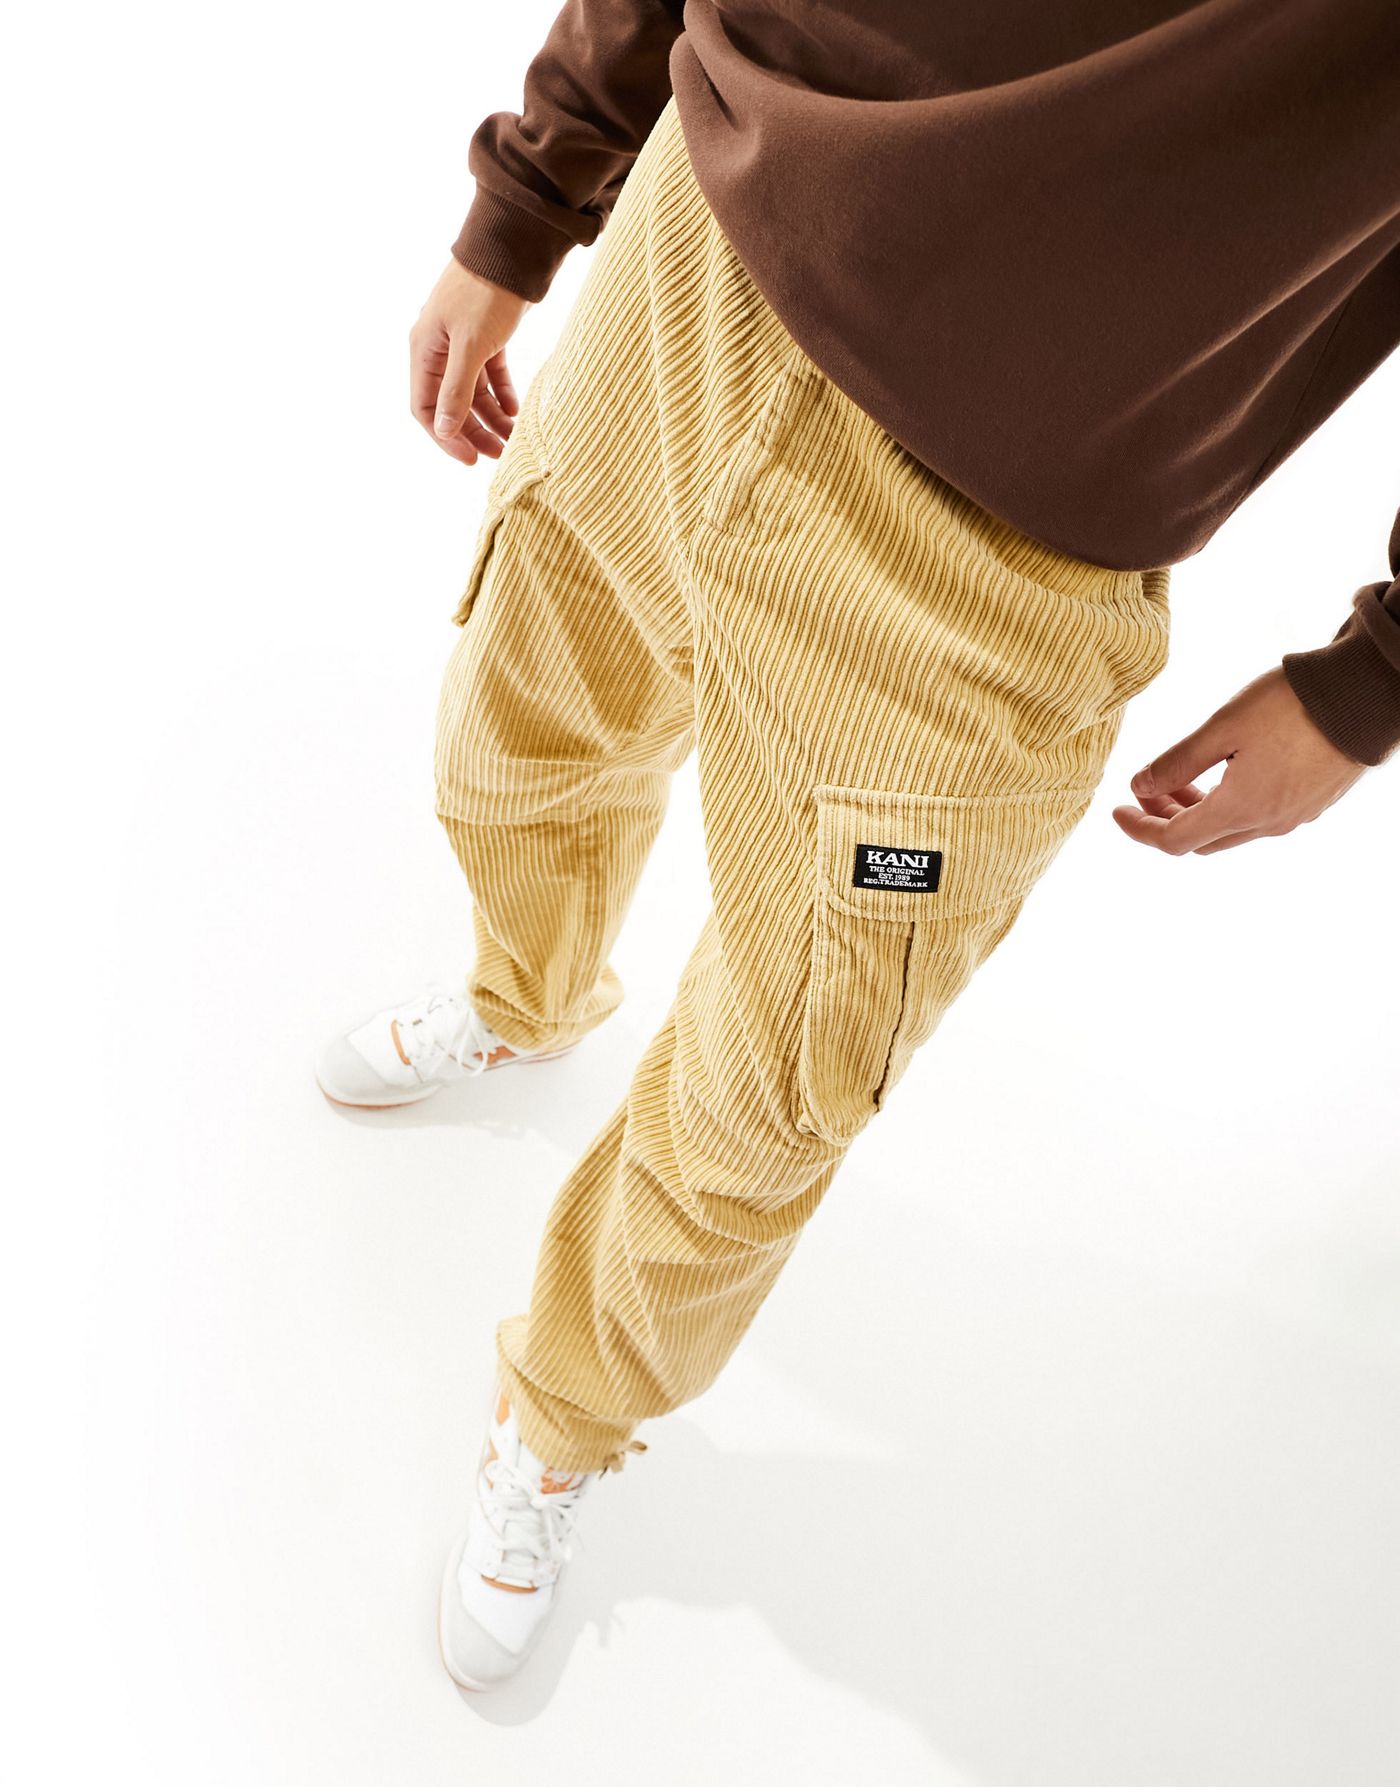 Karl Kani straight leg cord cargo trousers in beige with logo print